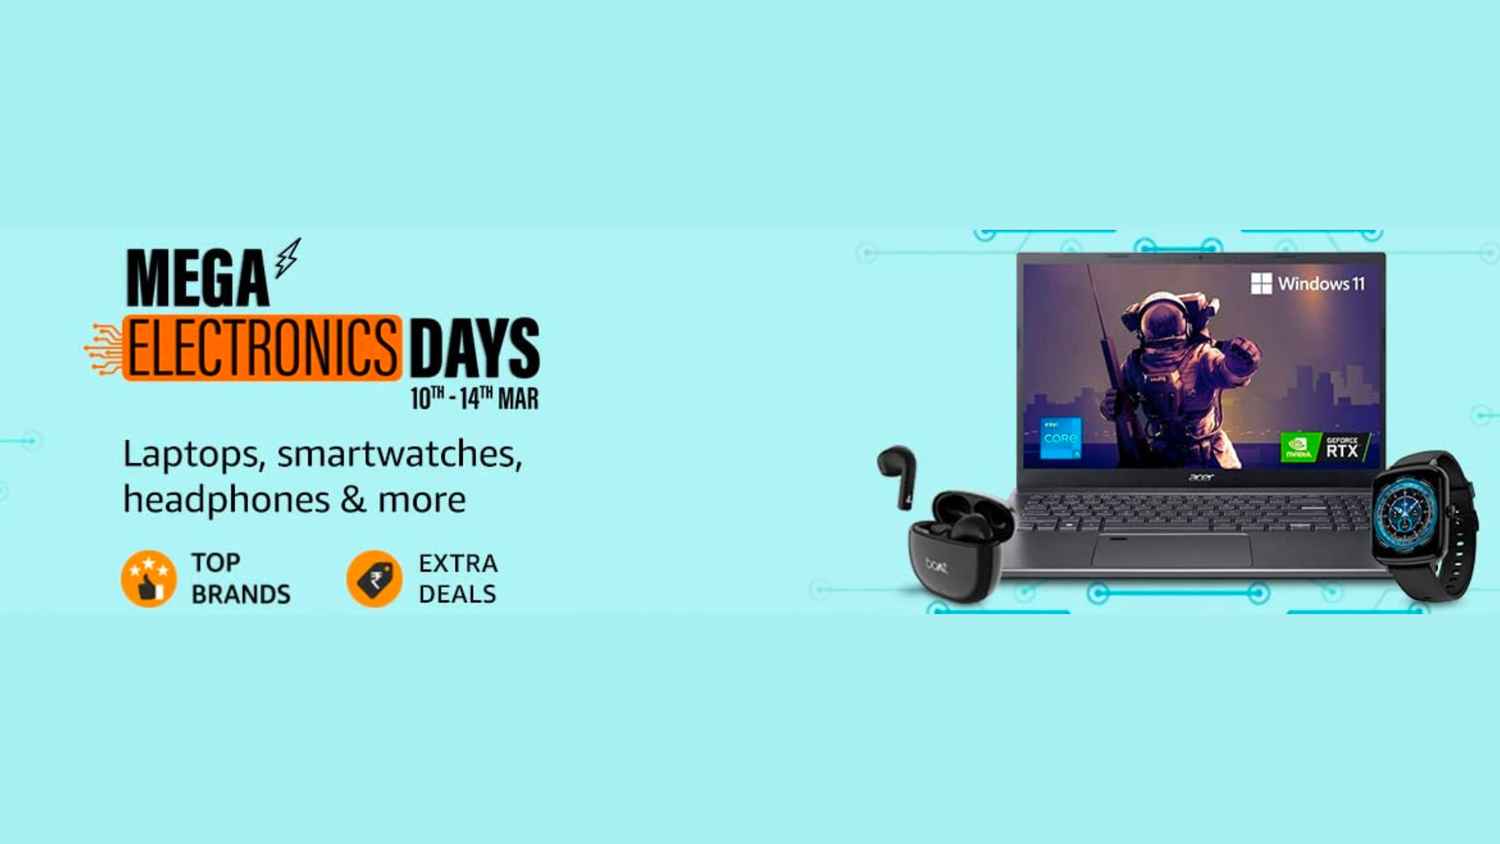 5 blockbuster deals on Amazon Mega Electronics Days that you should check out